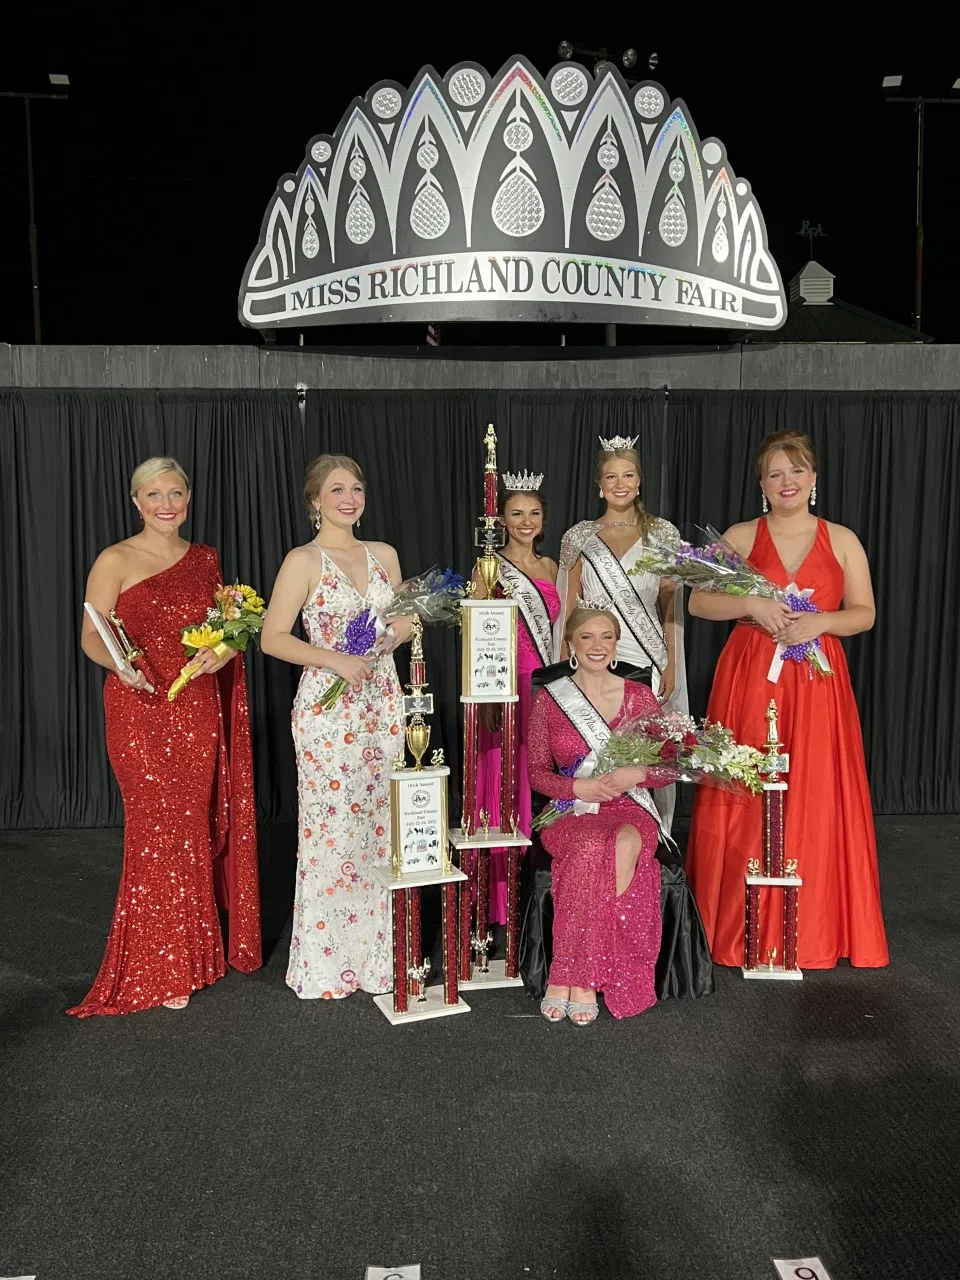 2022 MISS RICHLAND COUNTY FAIR QUEEN PAGEANT IN OLNEY LAST NIGHT WVLN